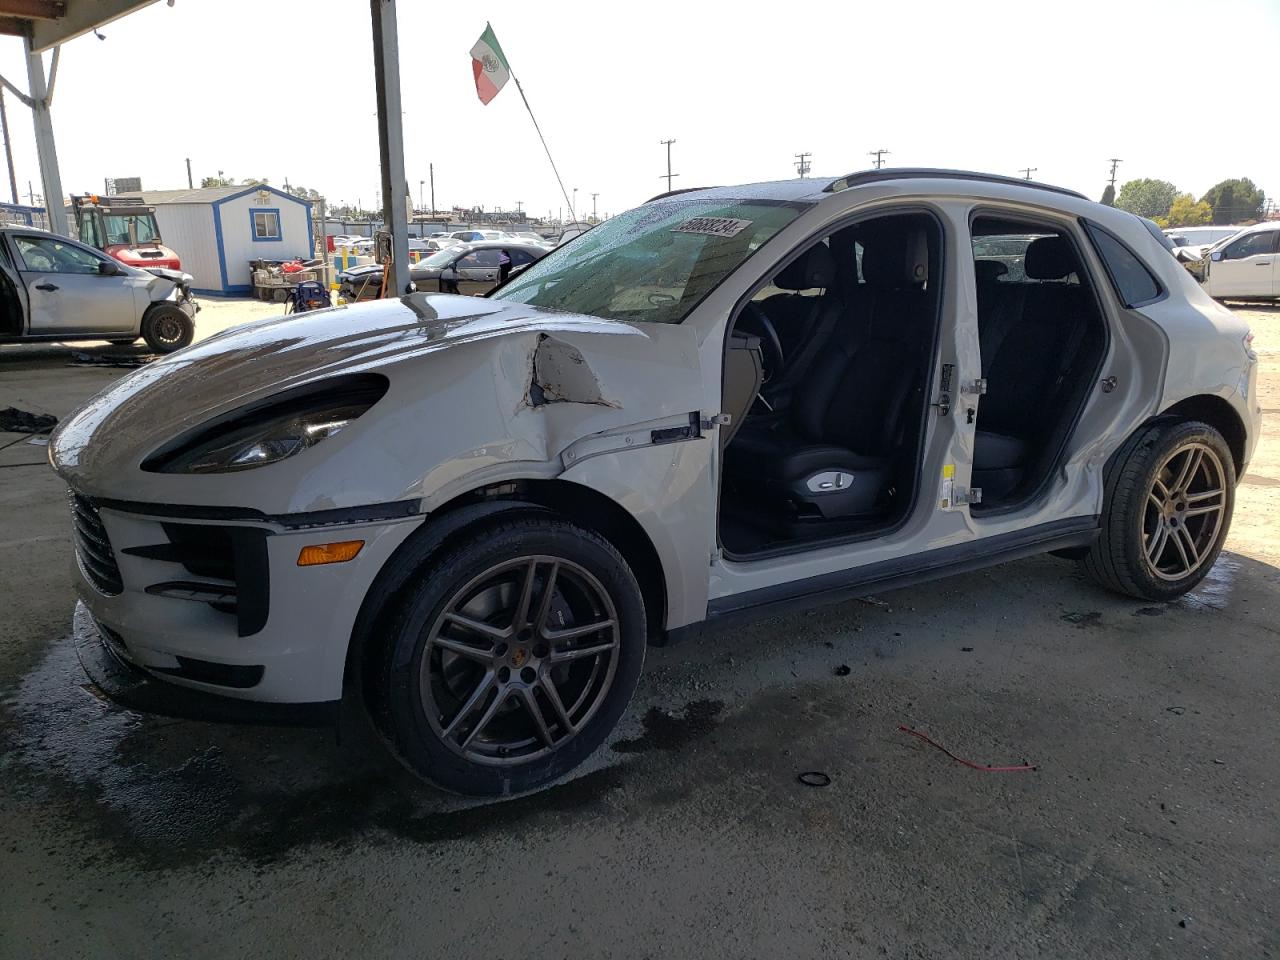 vin: WP1AA2A59MLB13696 WP1AA2A59MLB13696 2021 porsche macan 2000 for Sale in 90001 4111, Ca - Los Angeles, Los Angeles, California, USA